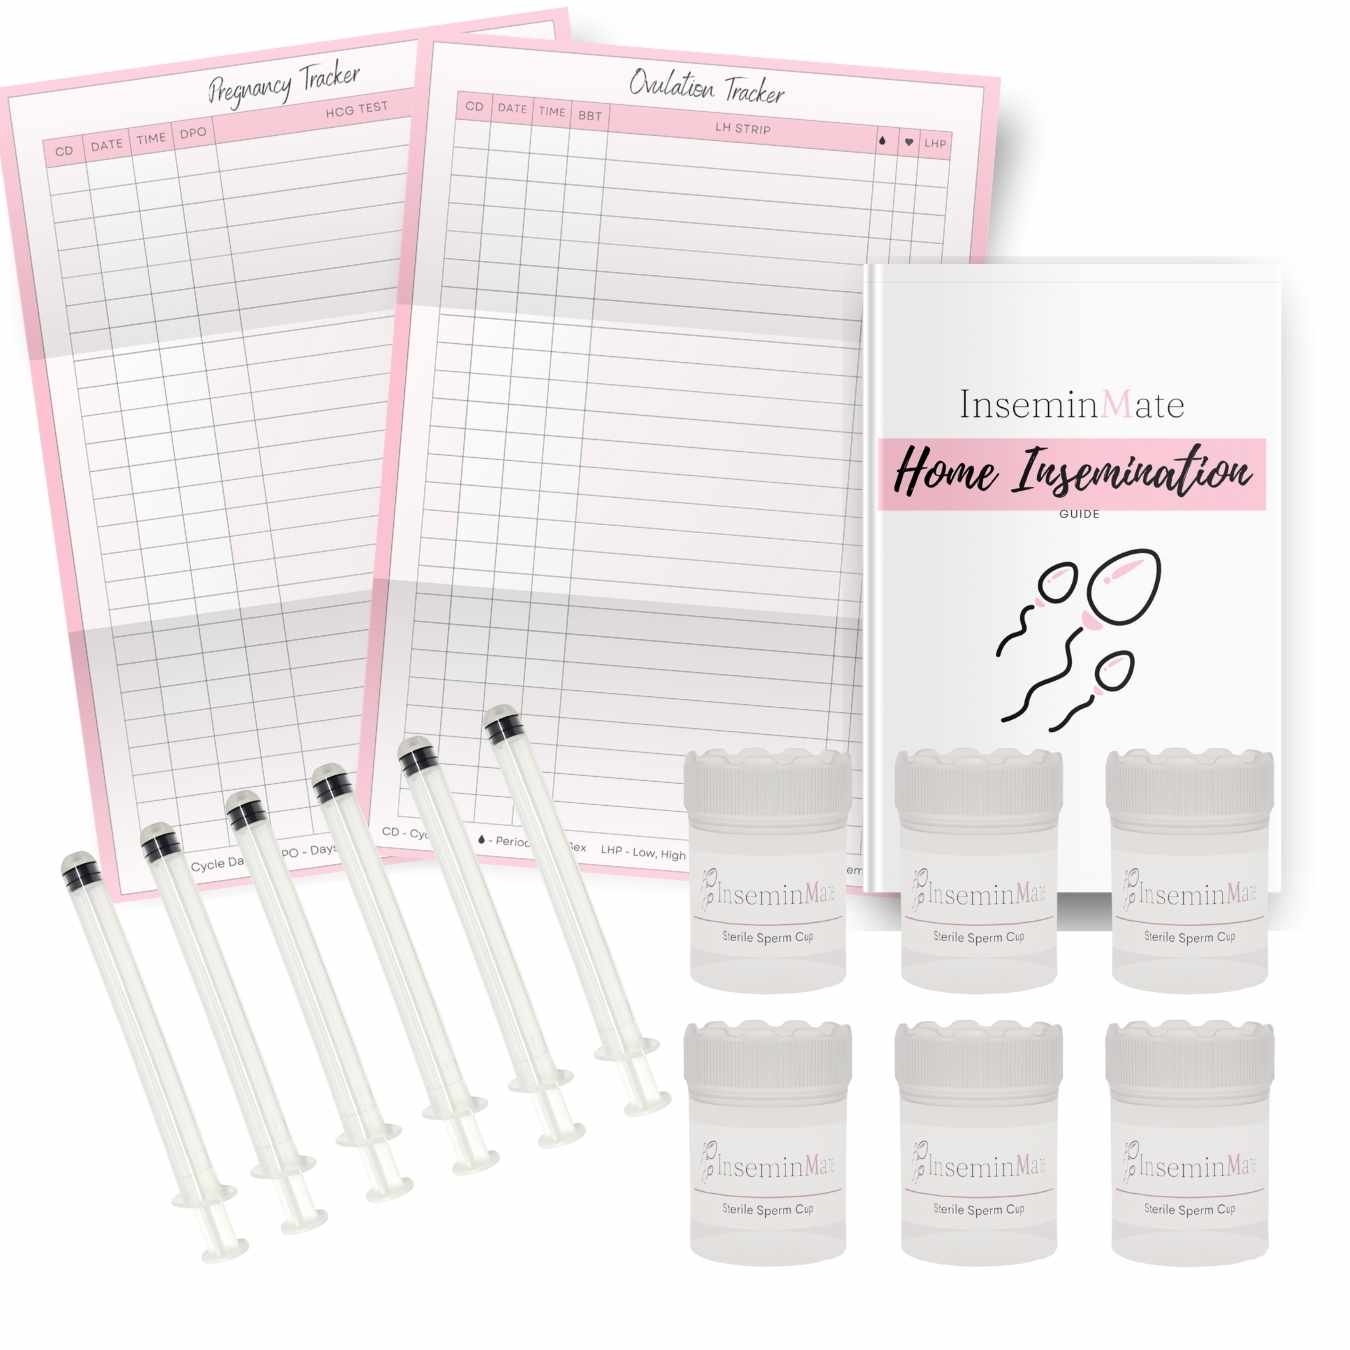 at home insemination 6 pack includes 6 cups, 6 insemination syringe, guide to insemination, pregnancy and ovulation tracker